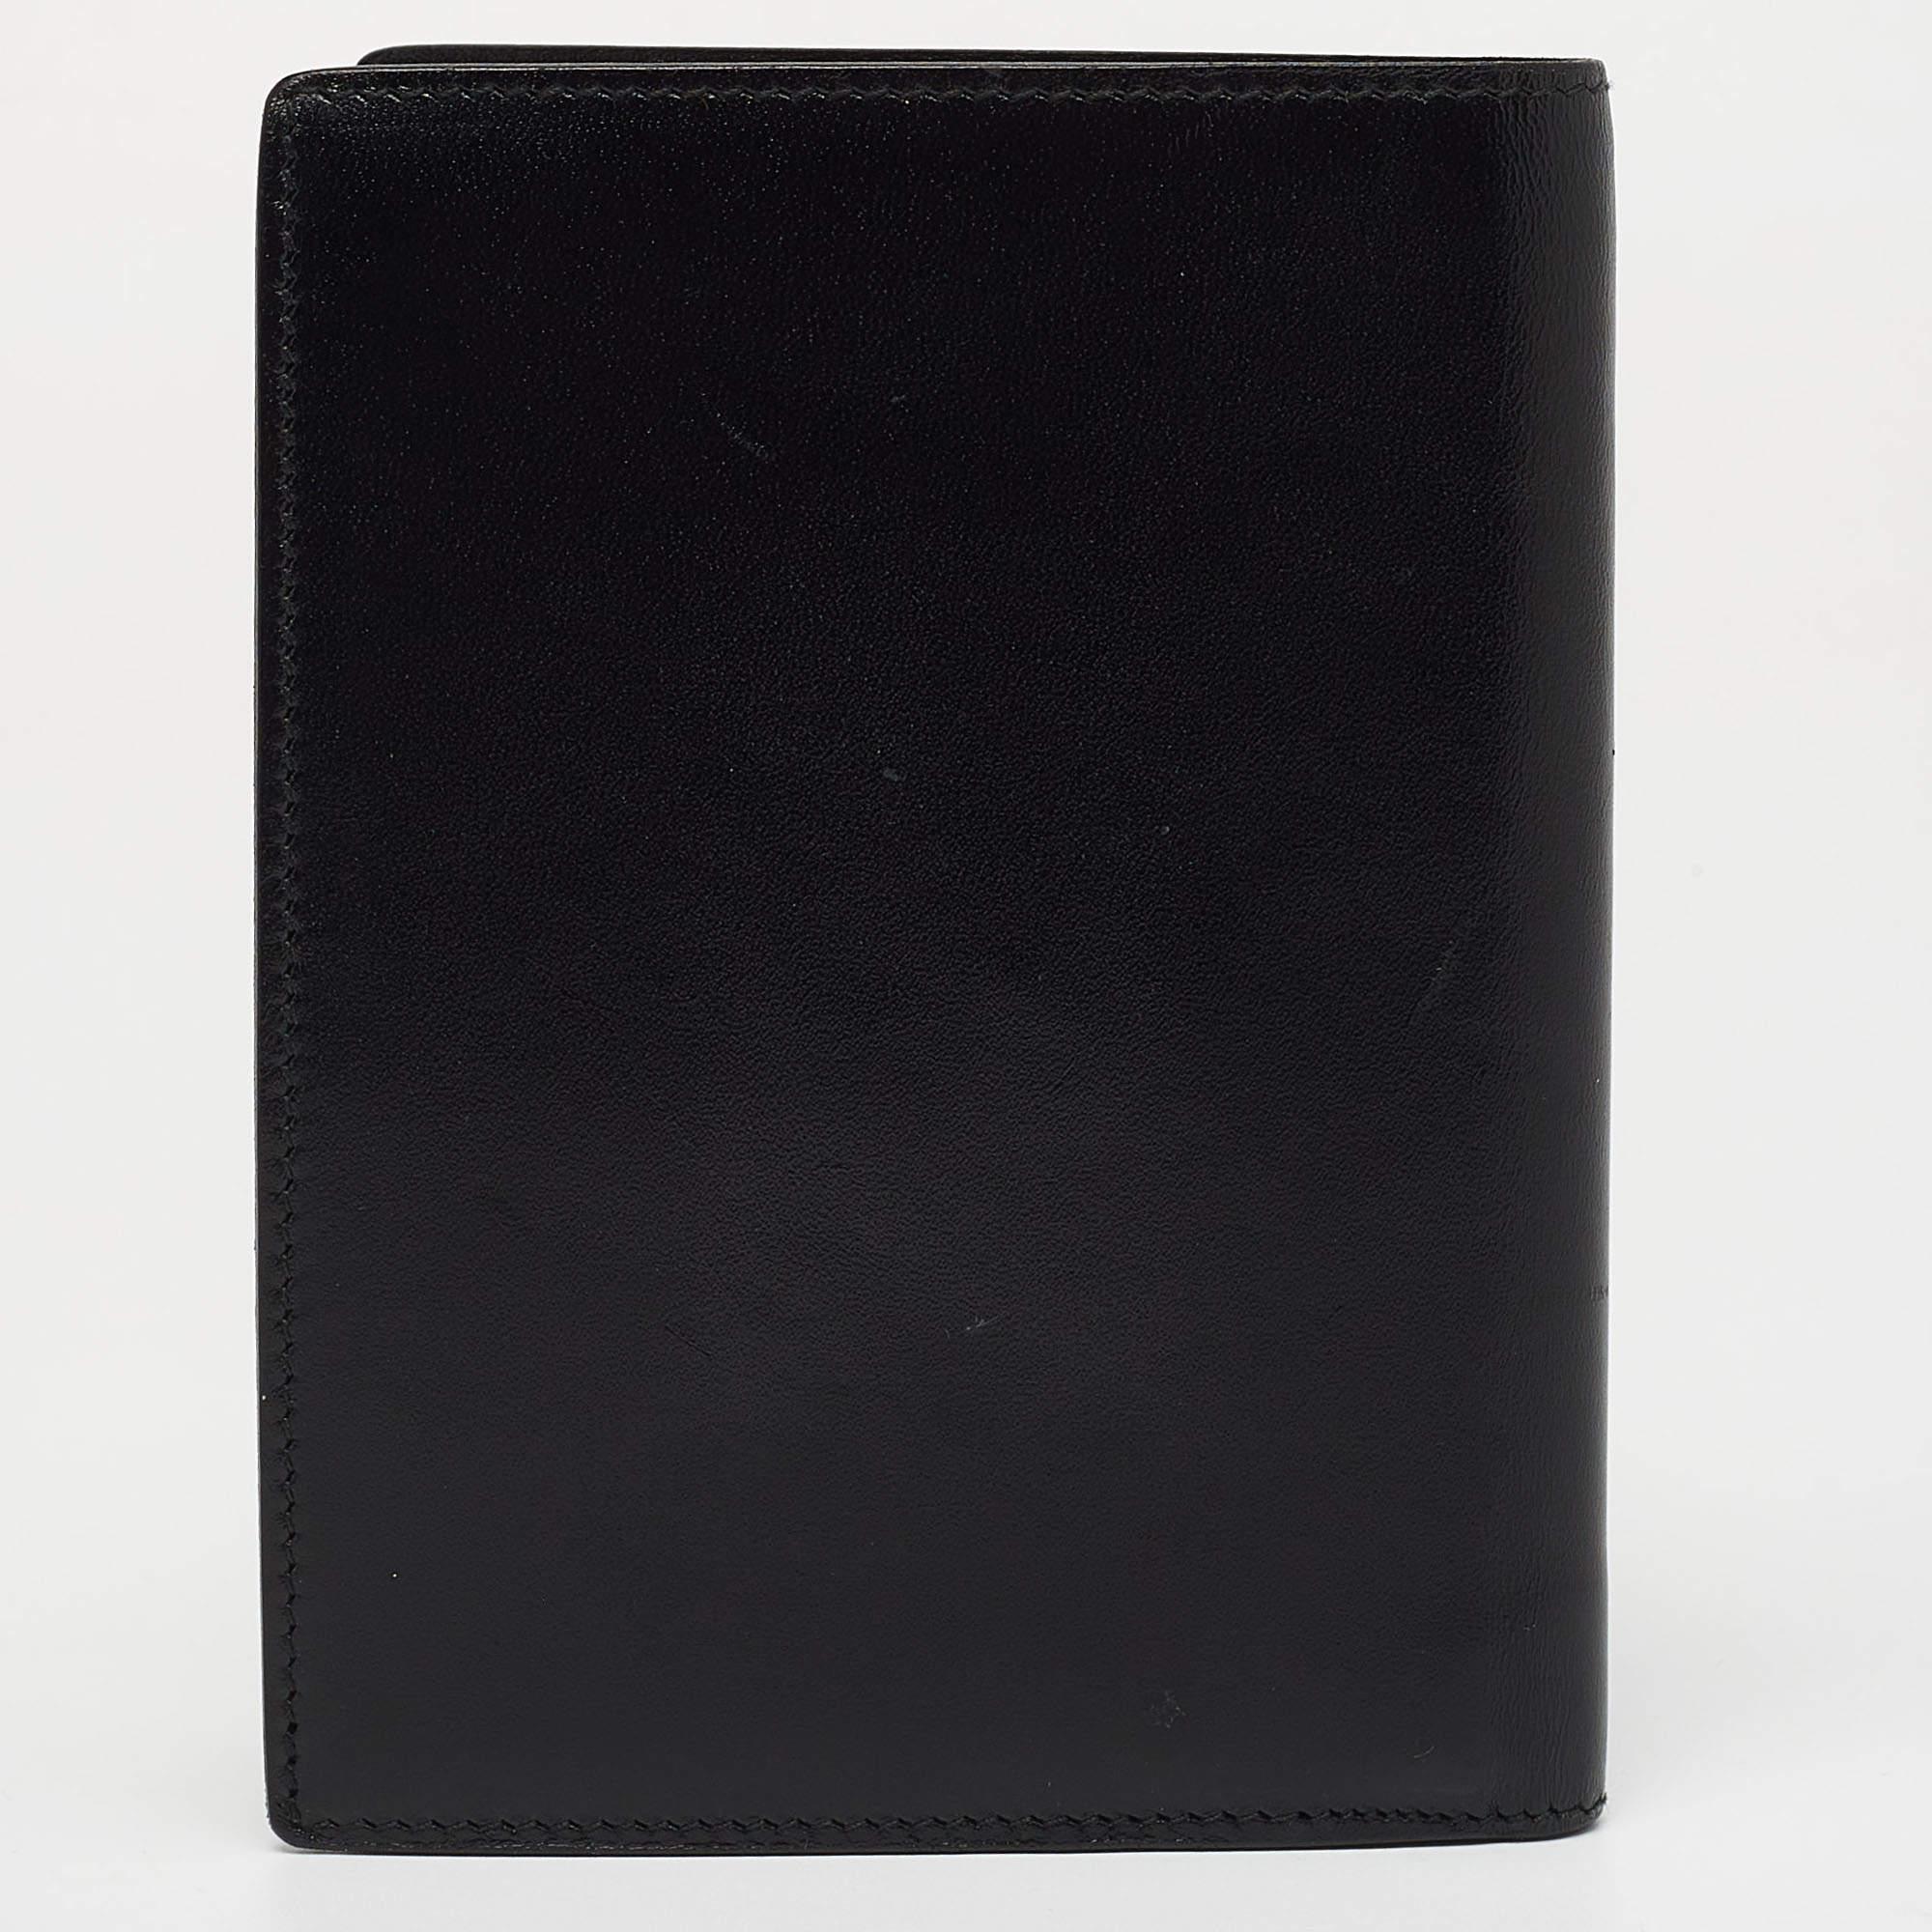 This designer wallet is an immaculate balance of sophistication and rational utility. It has been designed using prime quality materials and elevated by a sleek finish. The creation is equipped with ample space for your monetary essentials.

